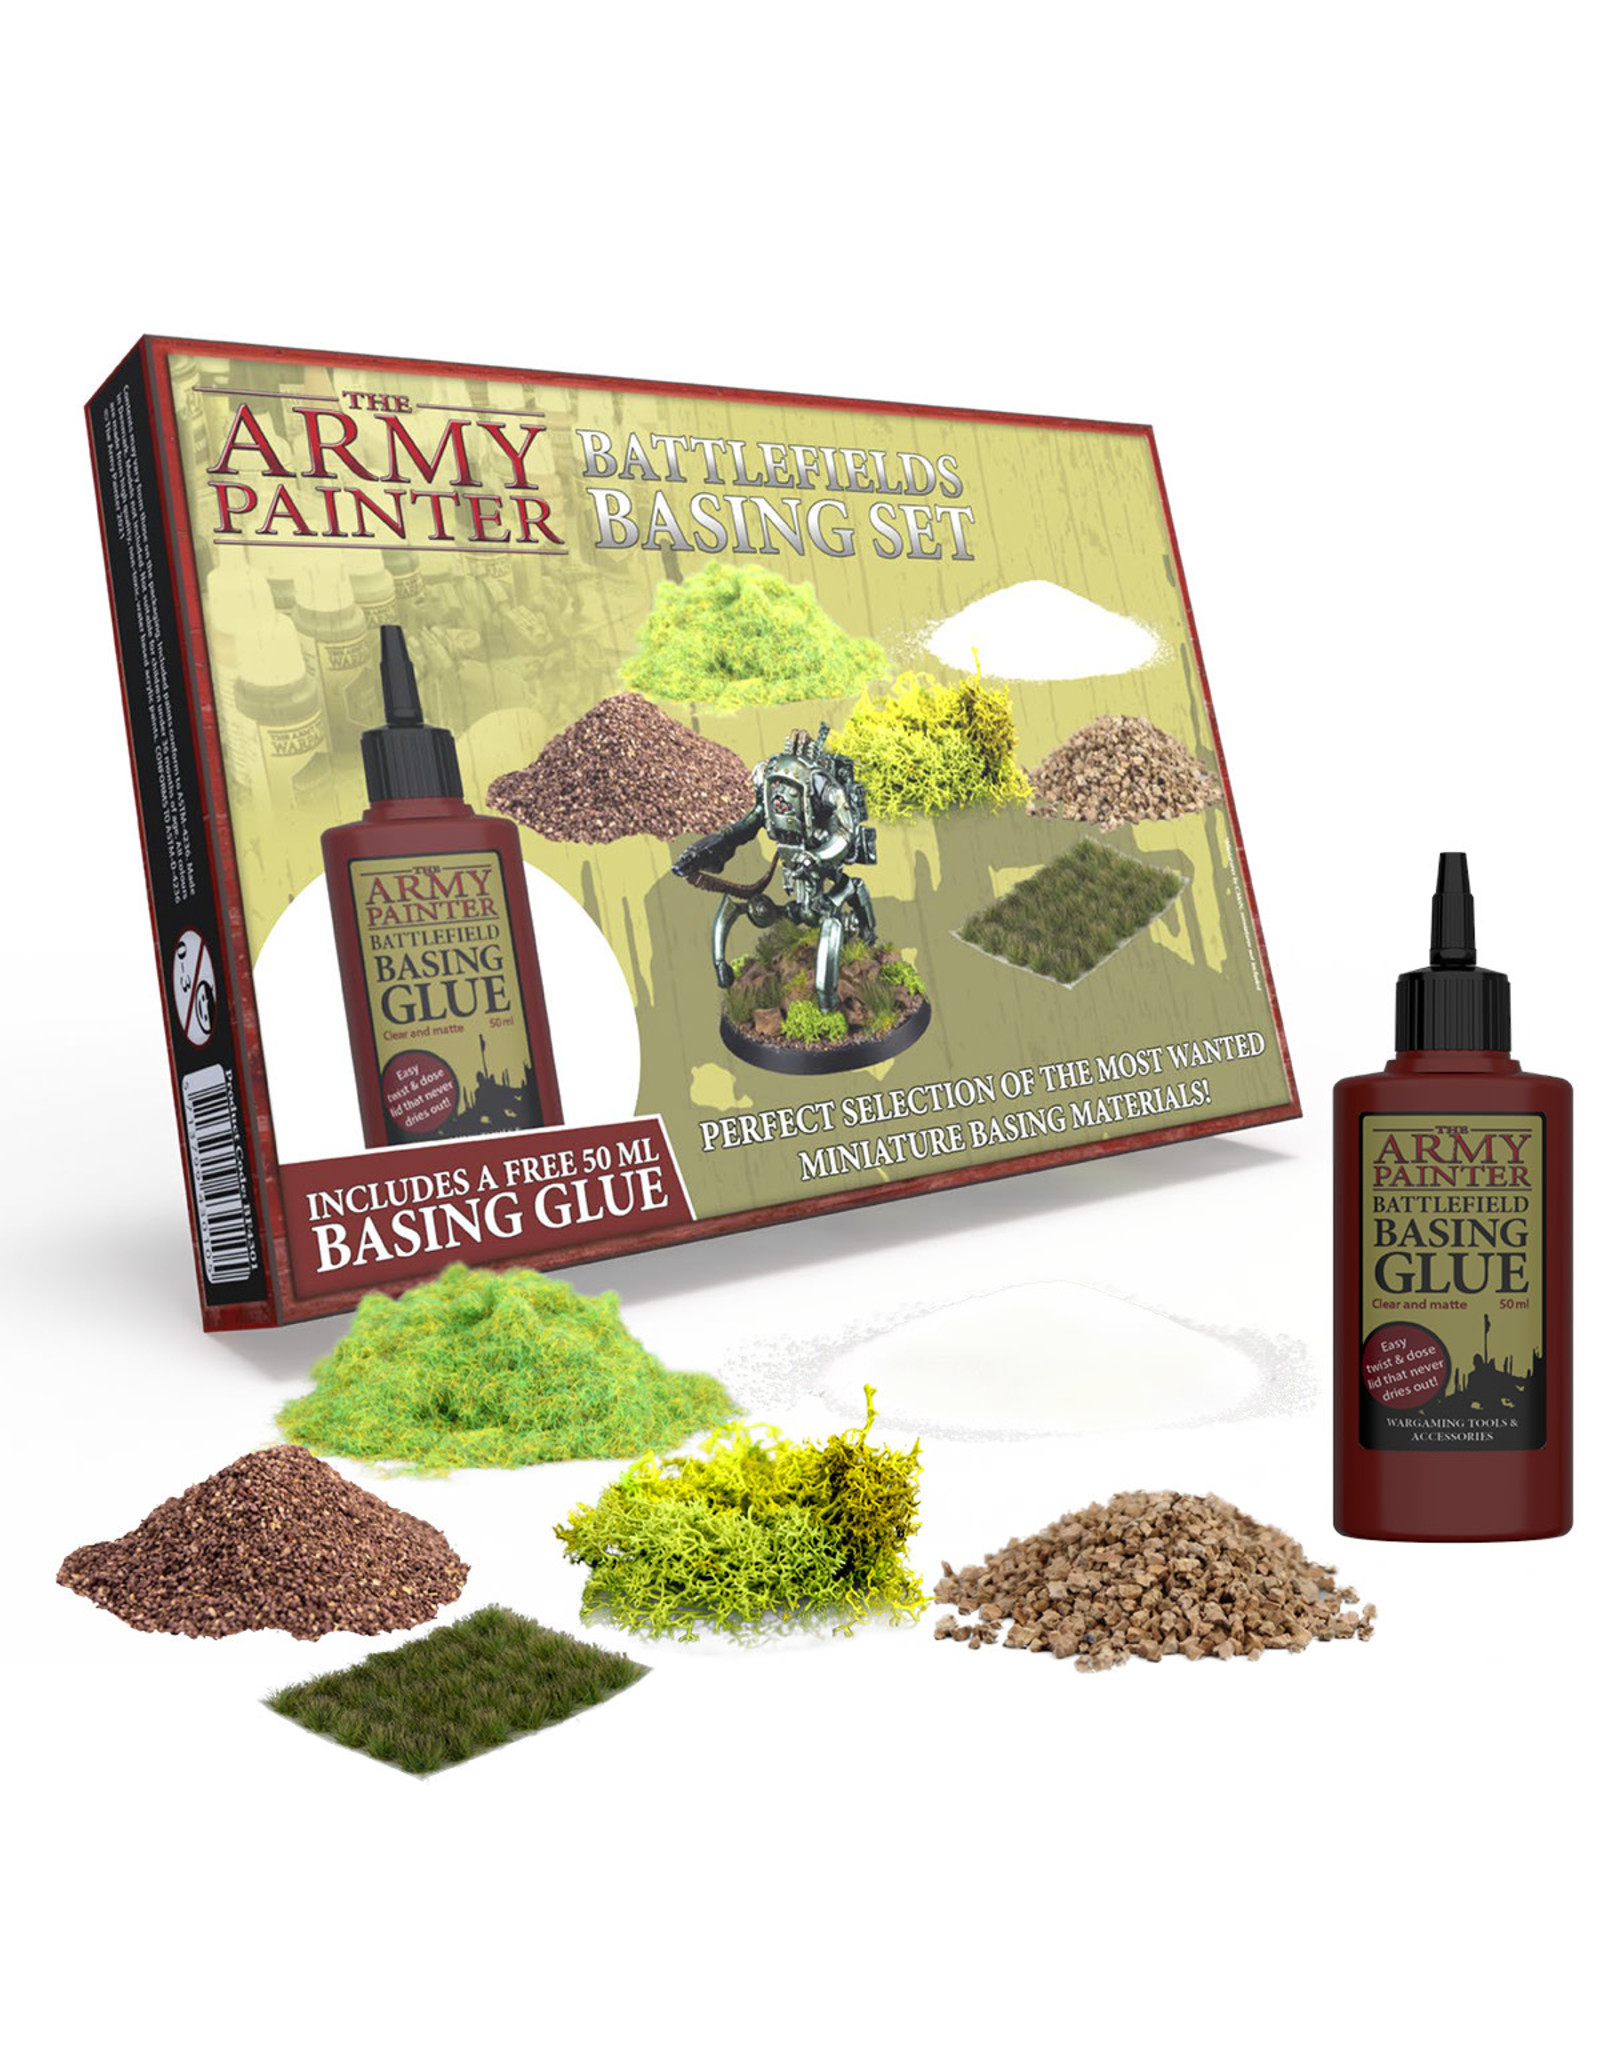 The Army Painter The Army Painter Battlefields Basing Set